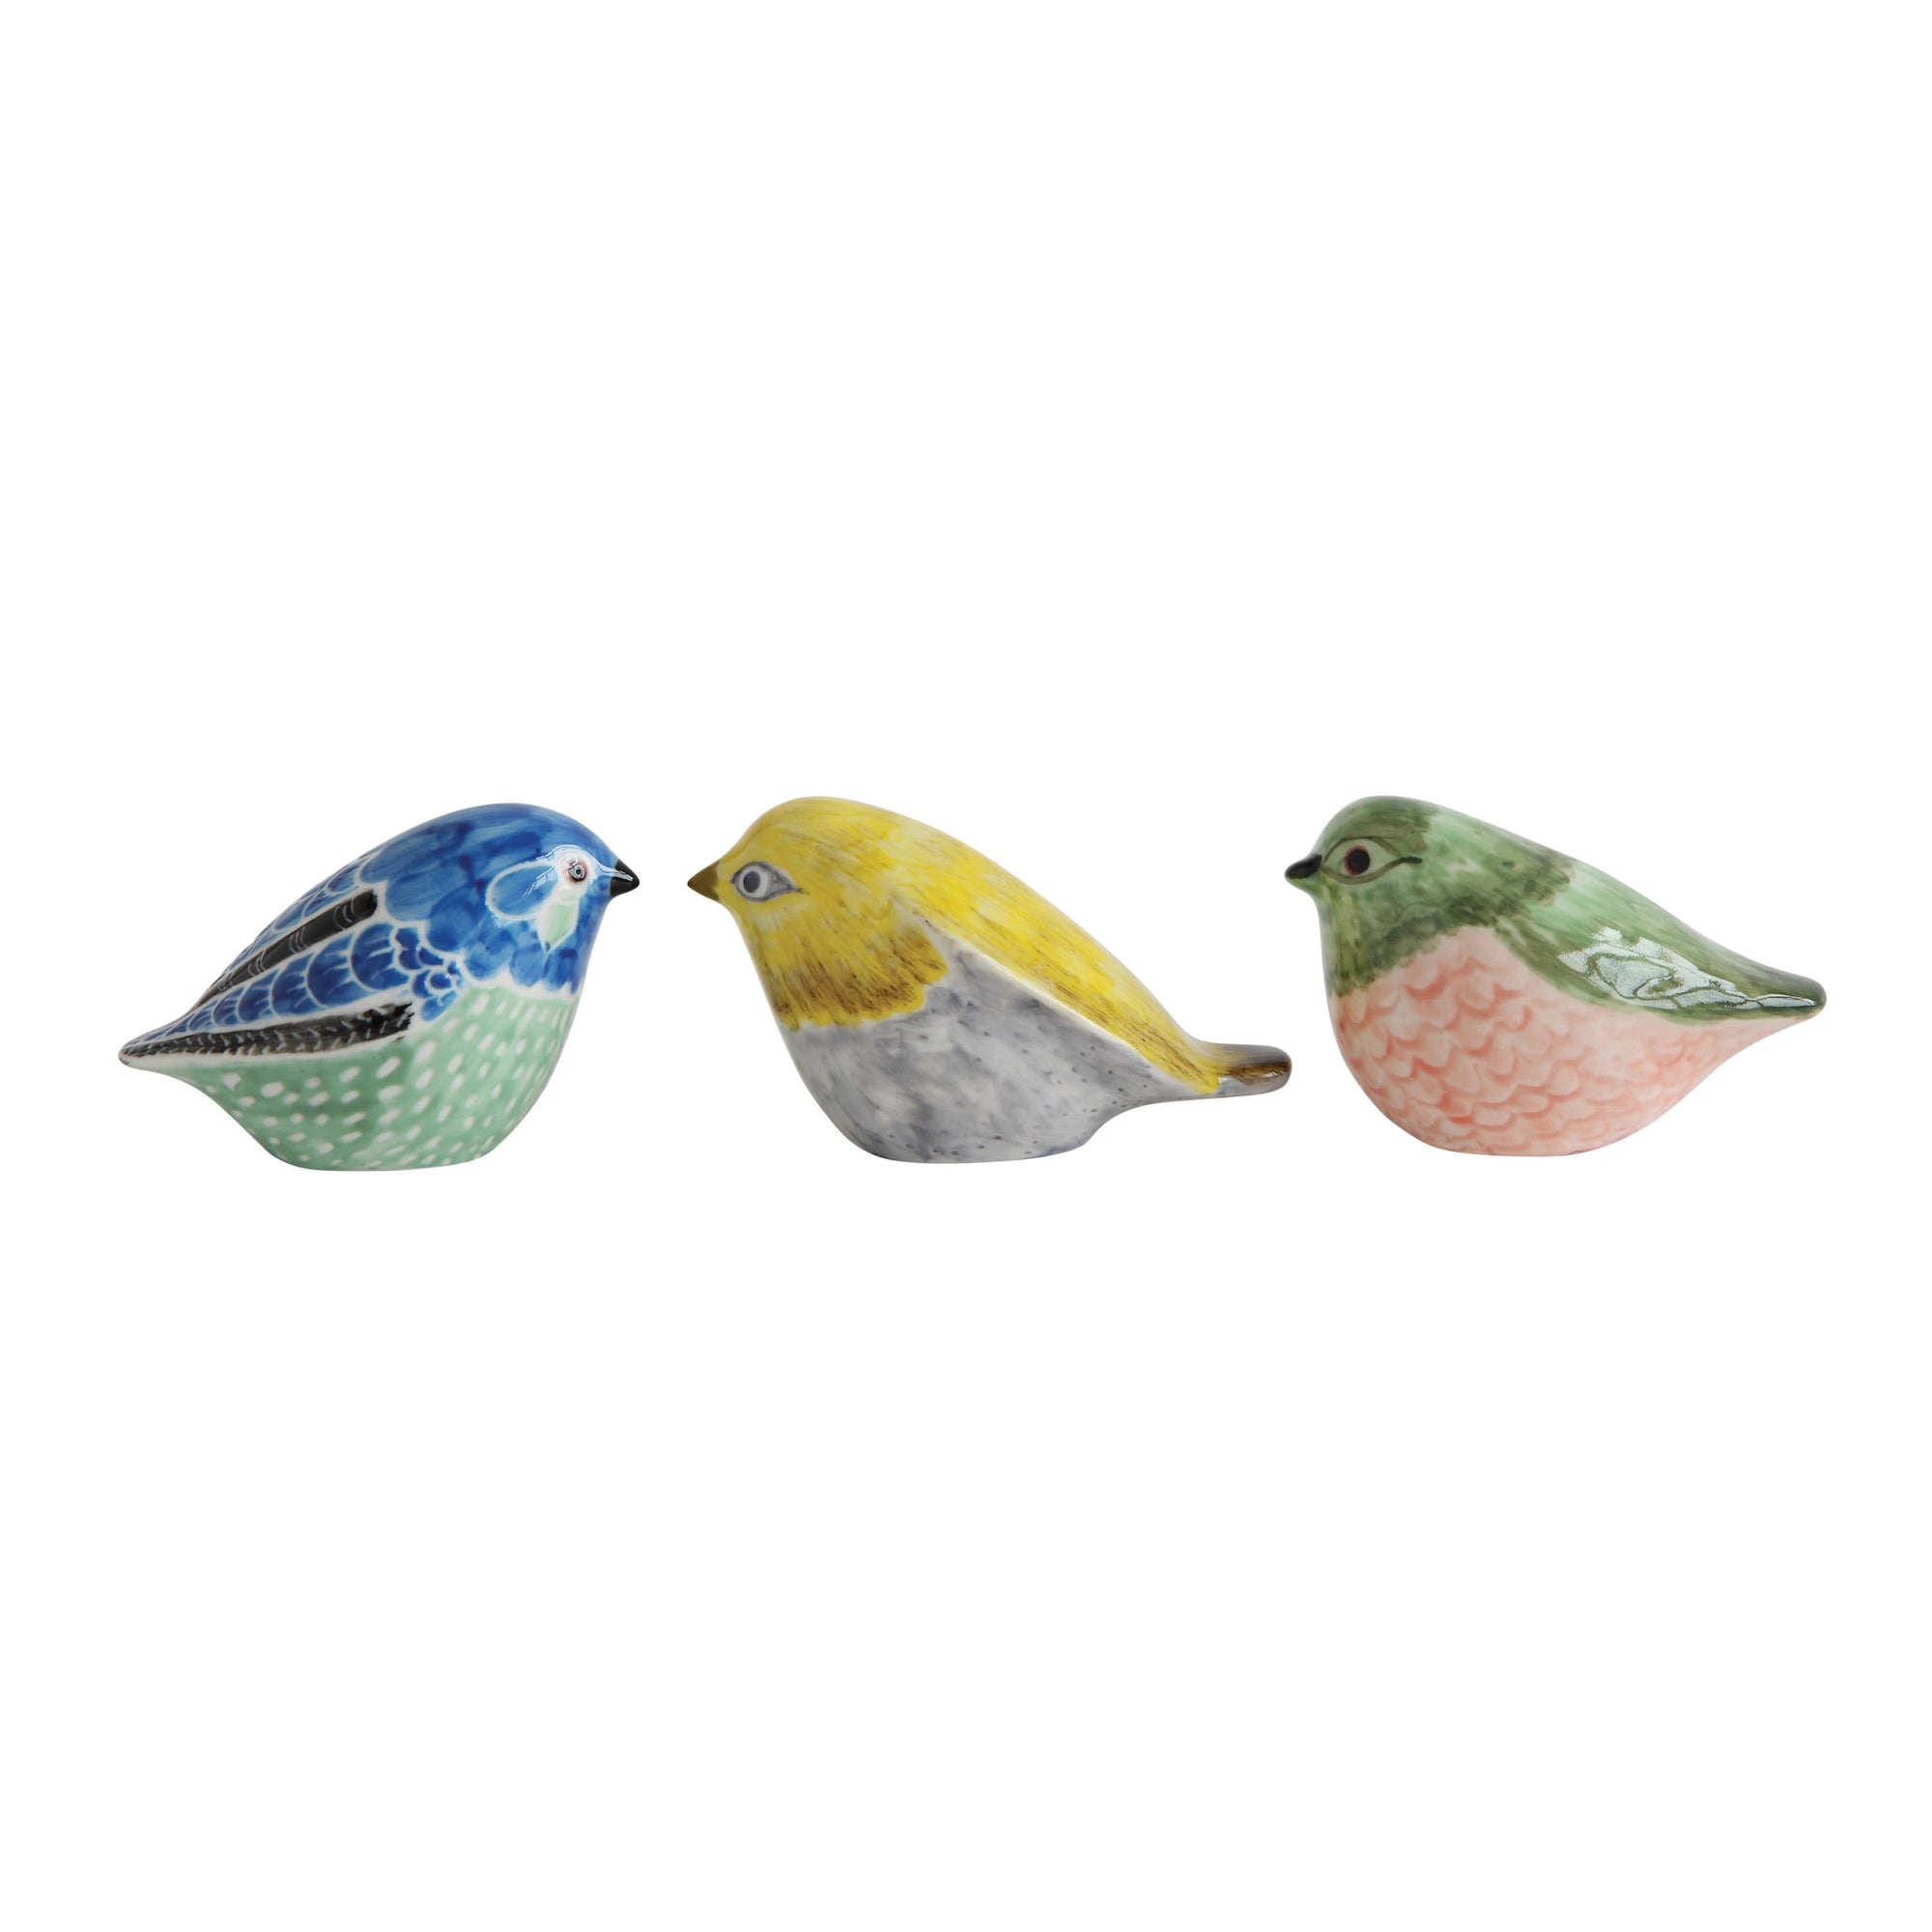 Playful and charming, these beautifully hand-painted stoneware birds add character to any space. Choose from three vibrant colors that will surely brighten up any room. Each measures 3.25"L x 2.5"H.